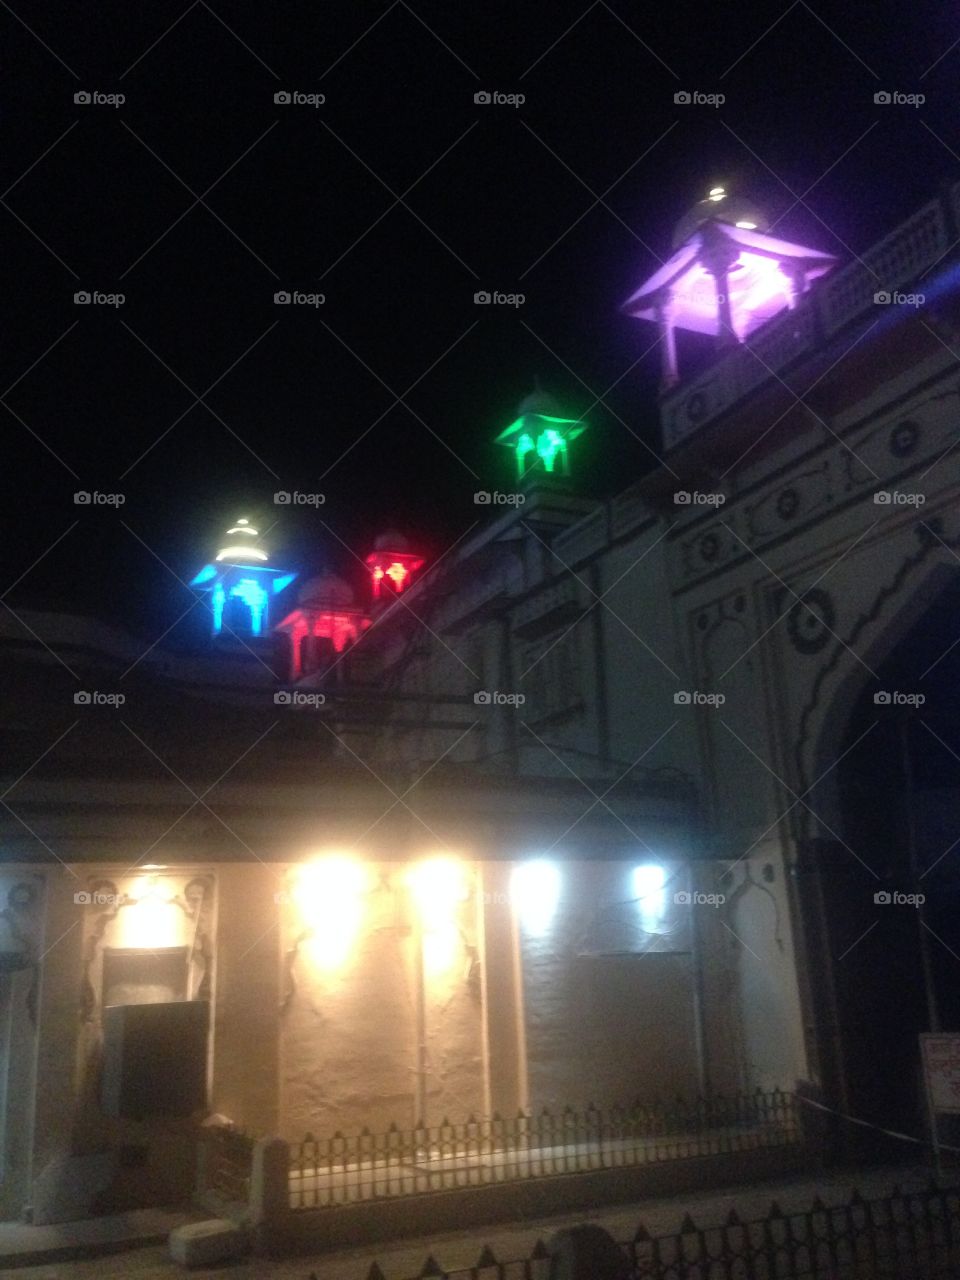 This photo capture on railway station of Bikaner at night when this going to best all around city.